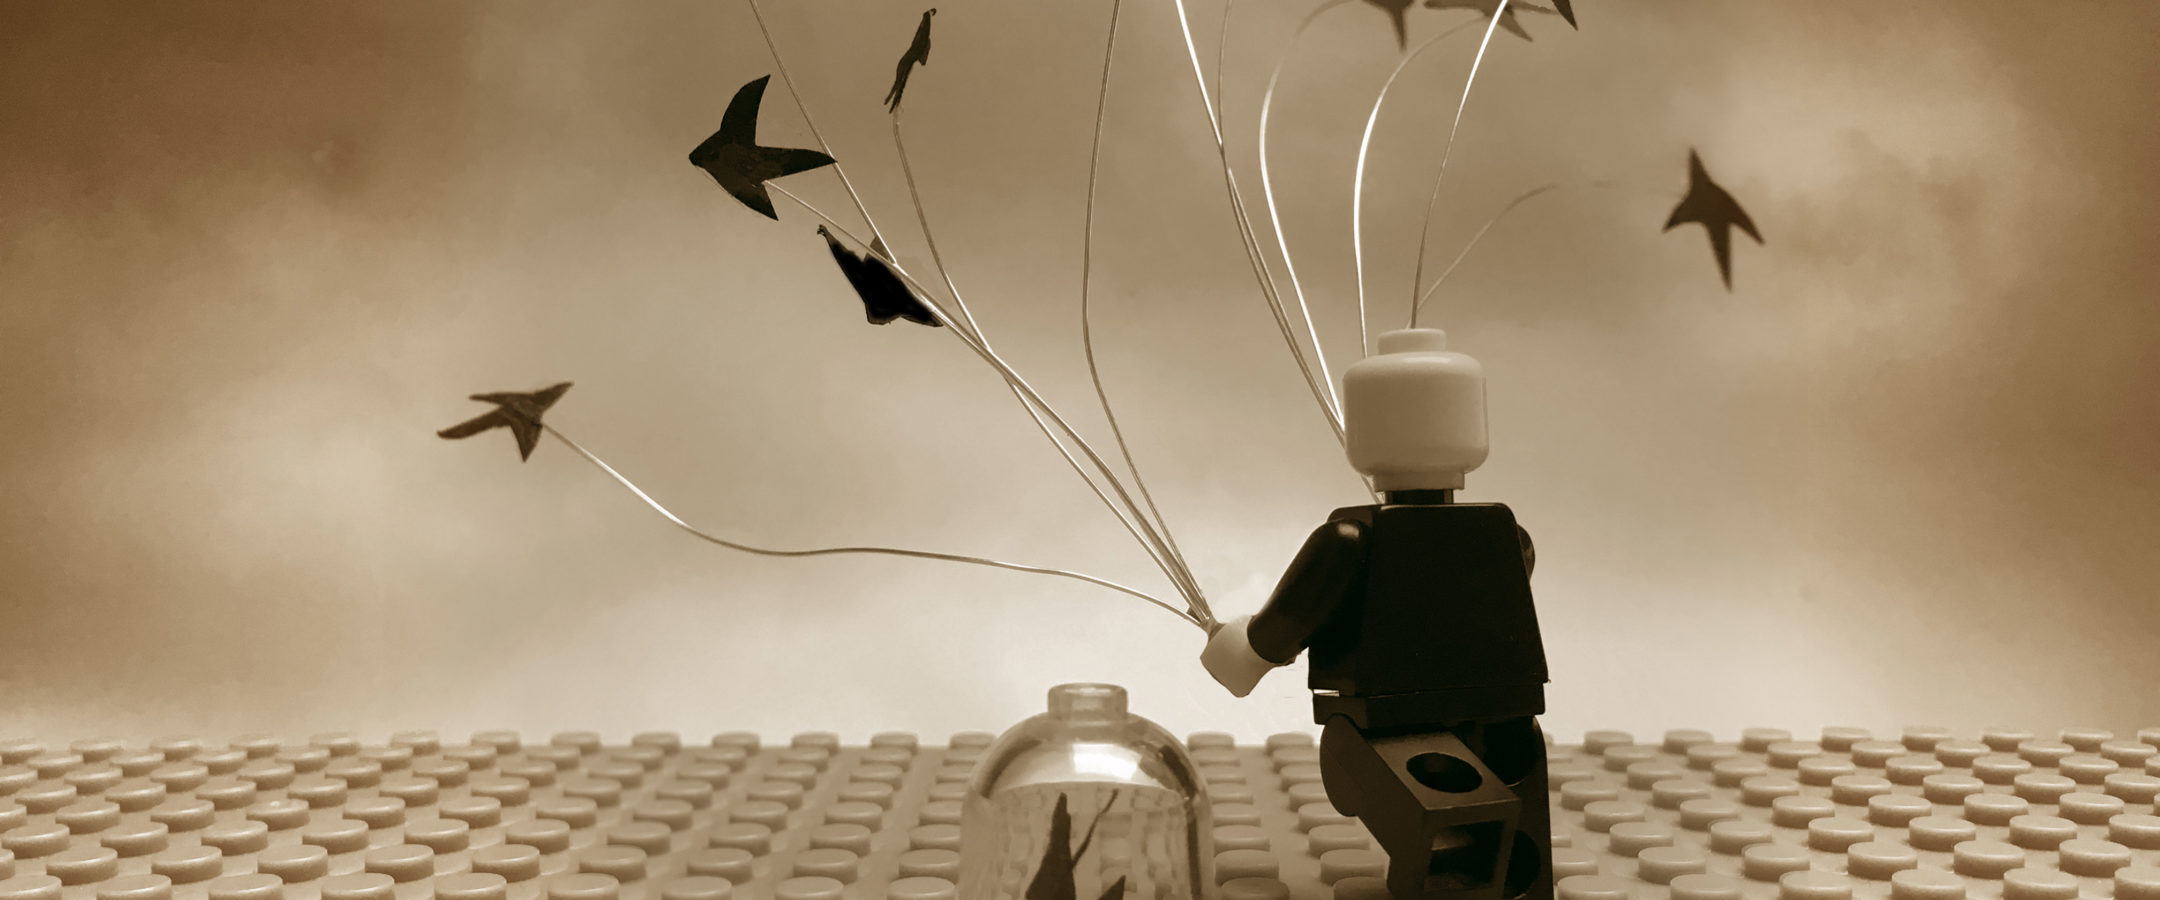 The Gloaming 2 Lego Cover